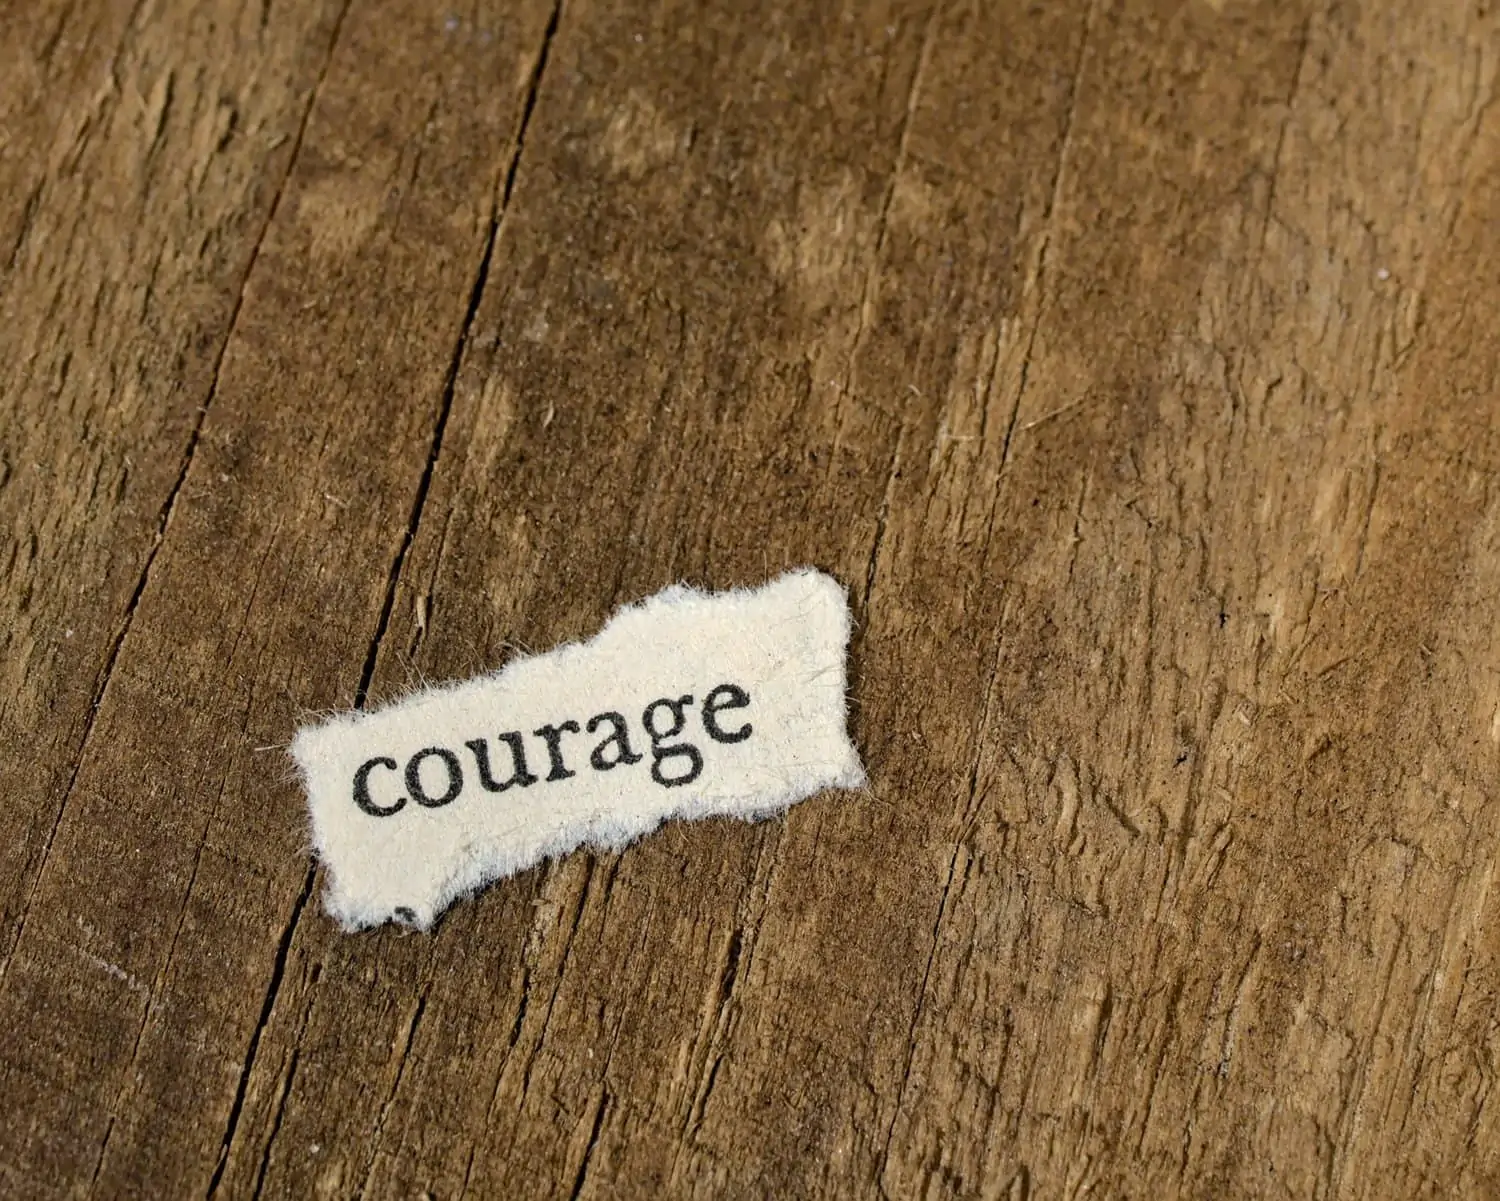 Courage is important for vulnerability